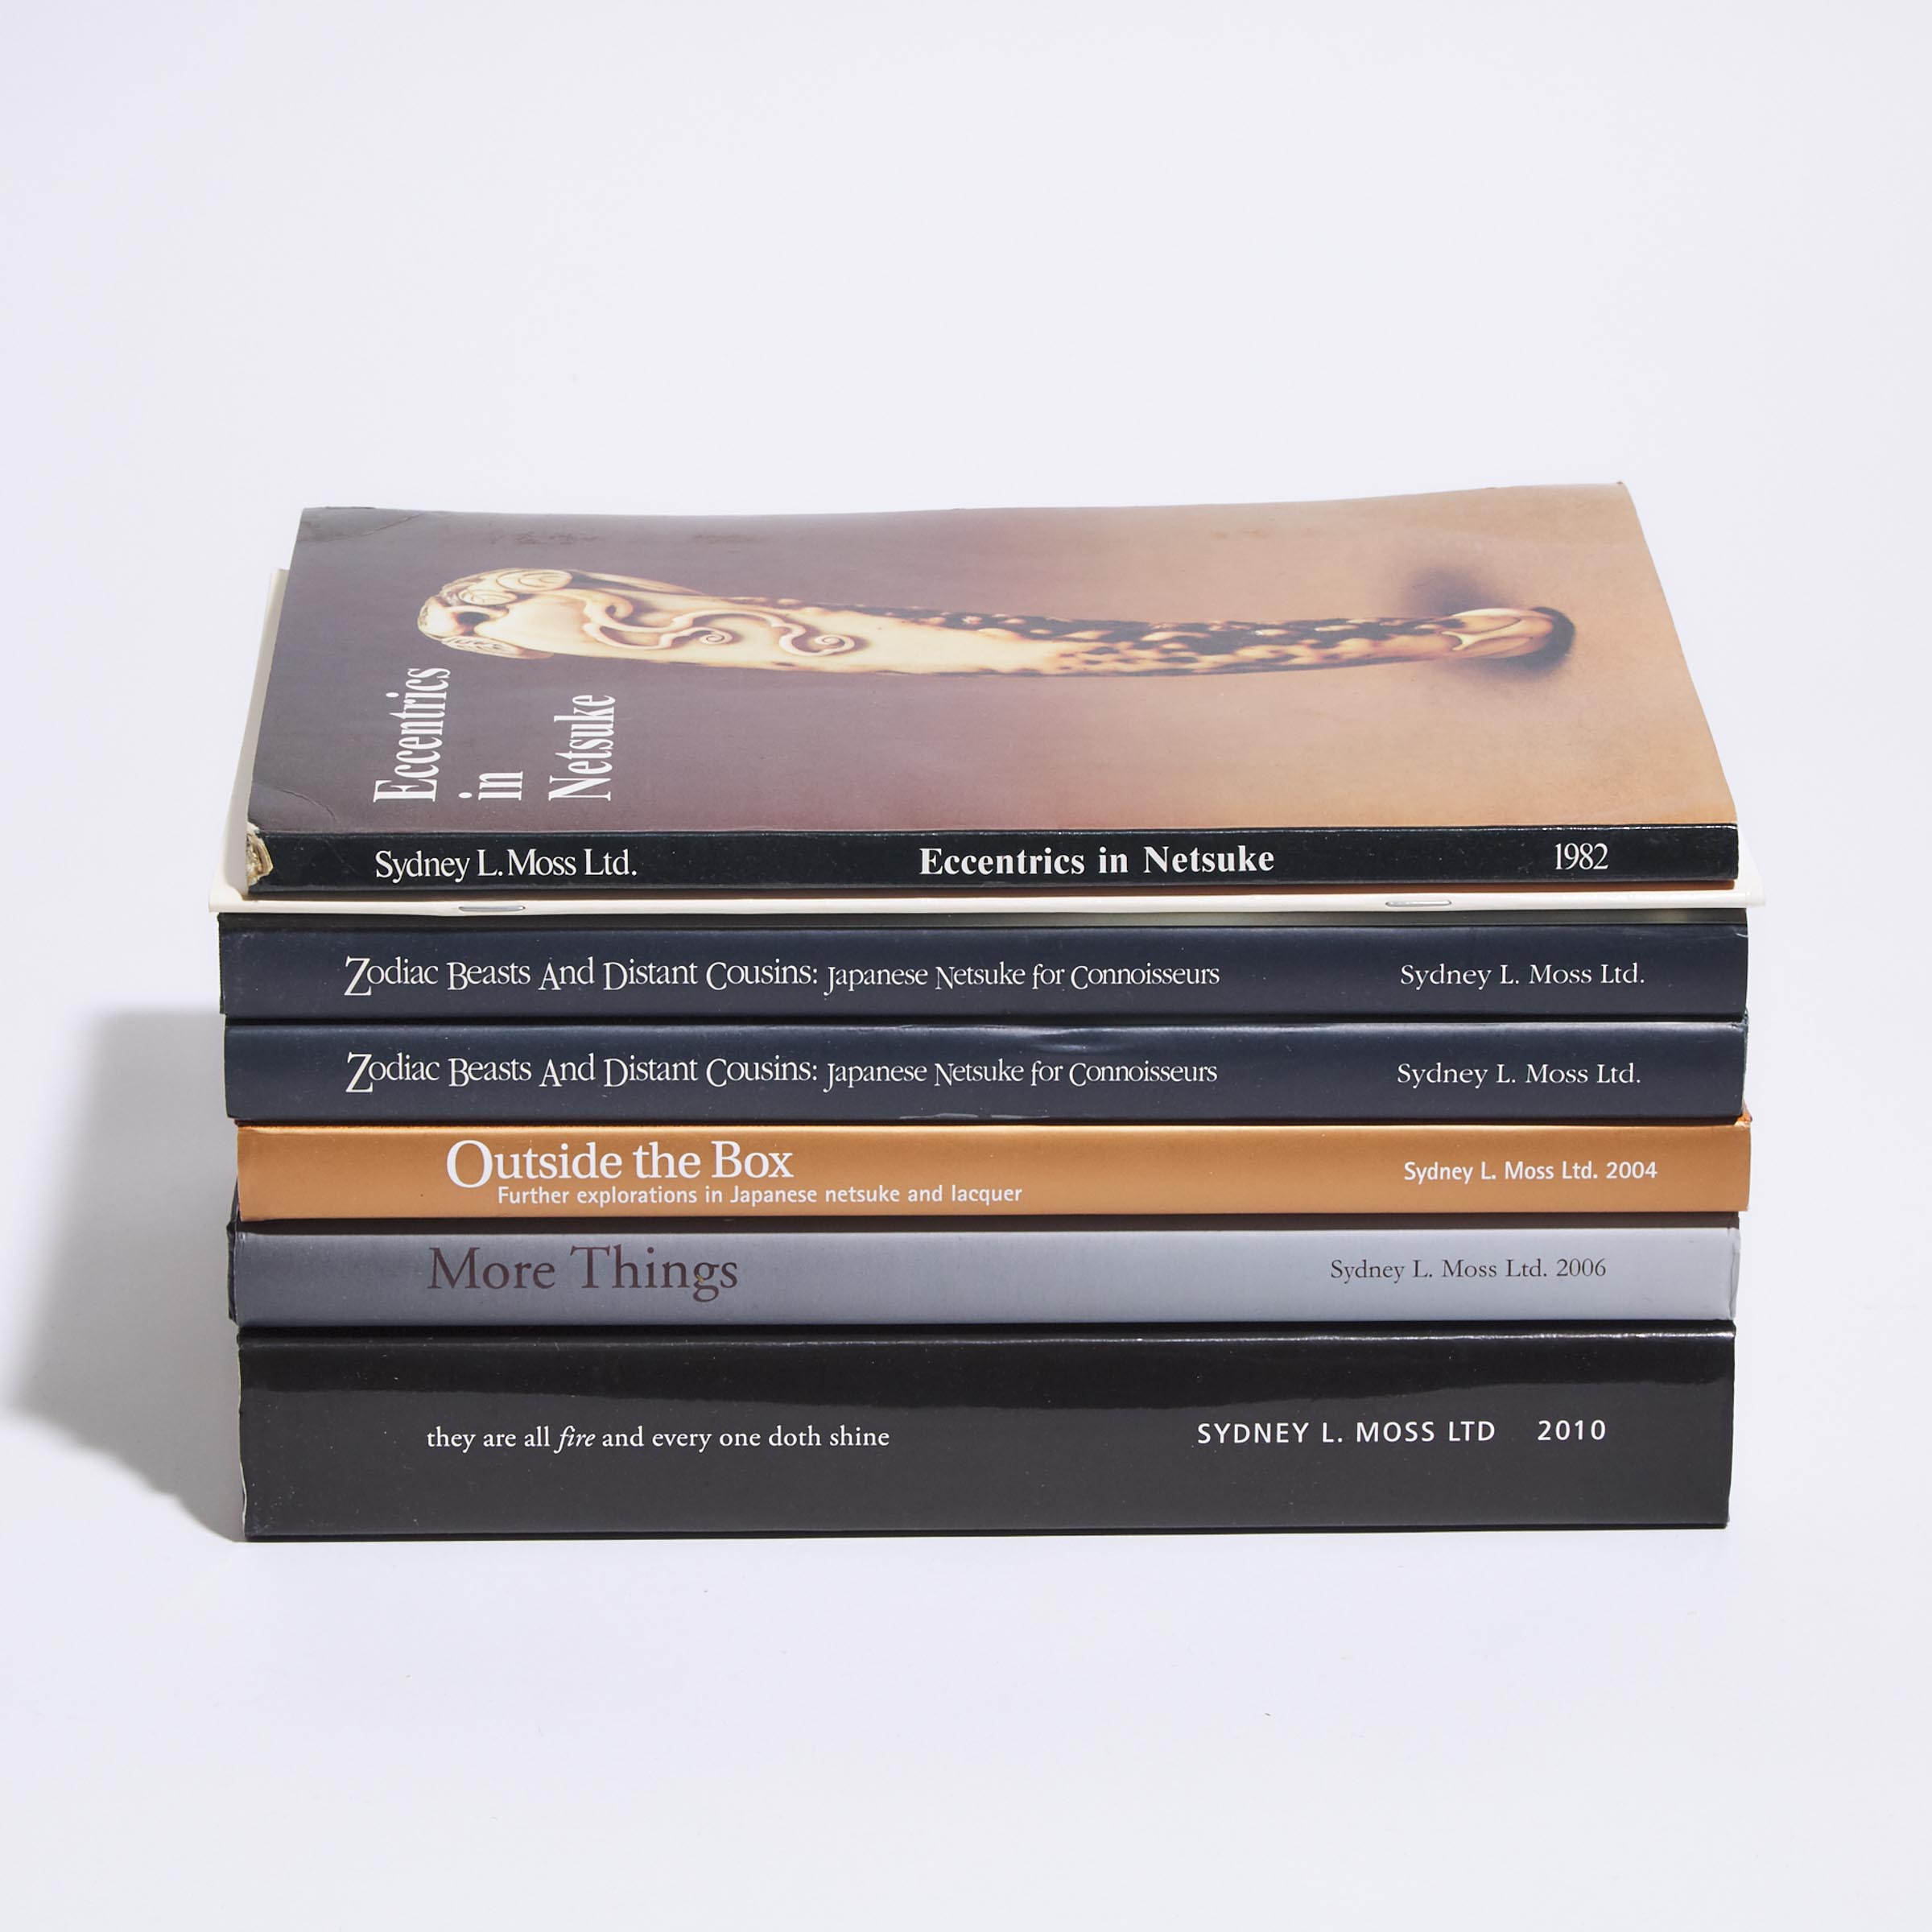 A Group of Seven Sidney L. Moss Ltd Books and Catalogues on Netsuke, 1982-2010